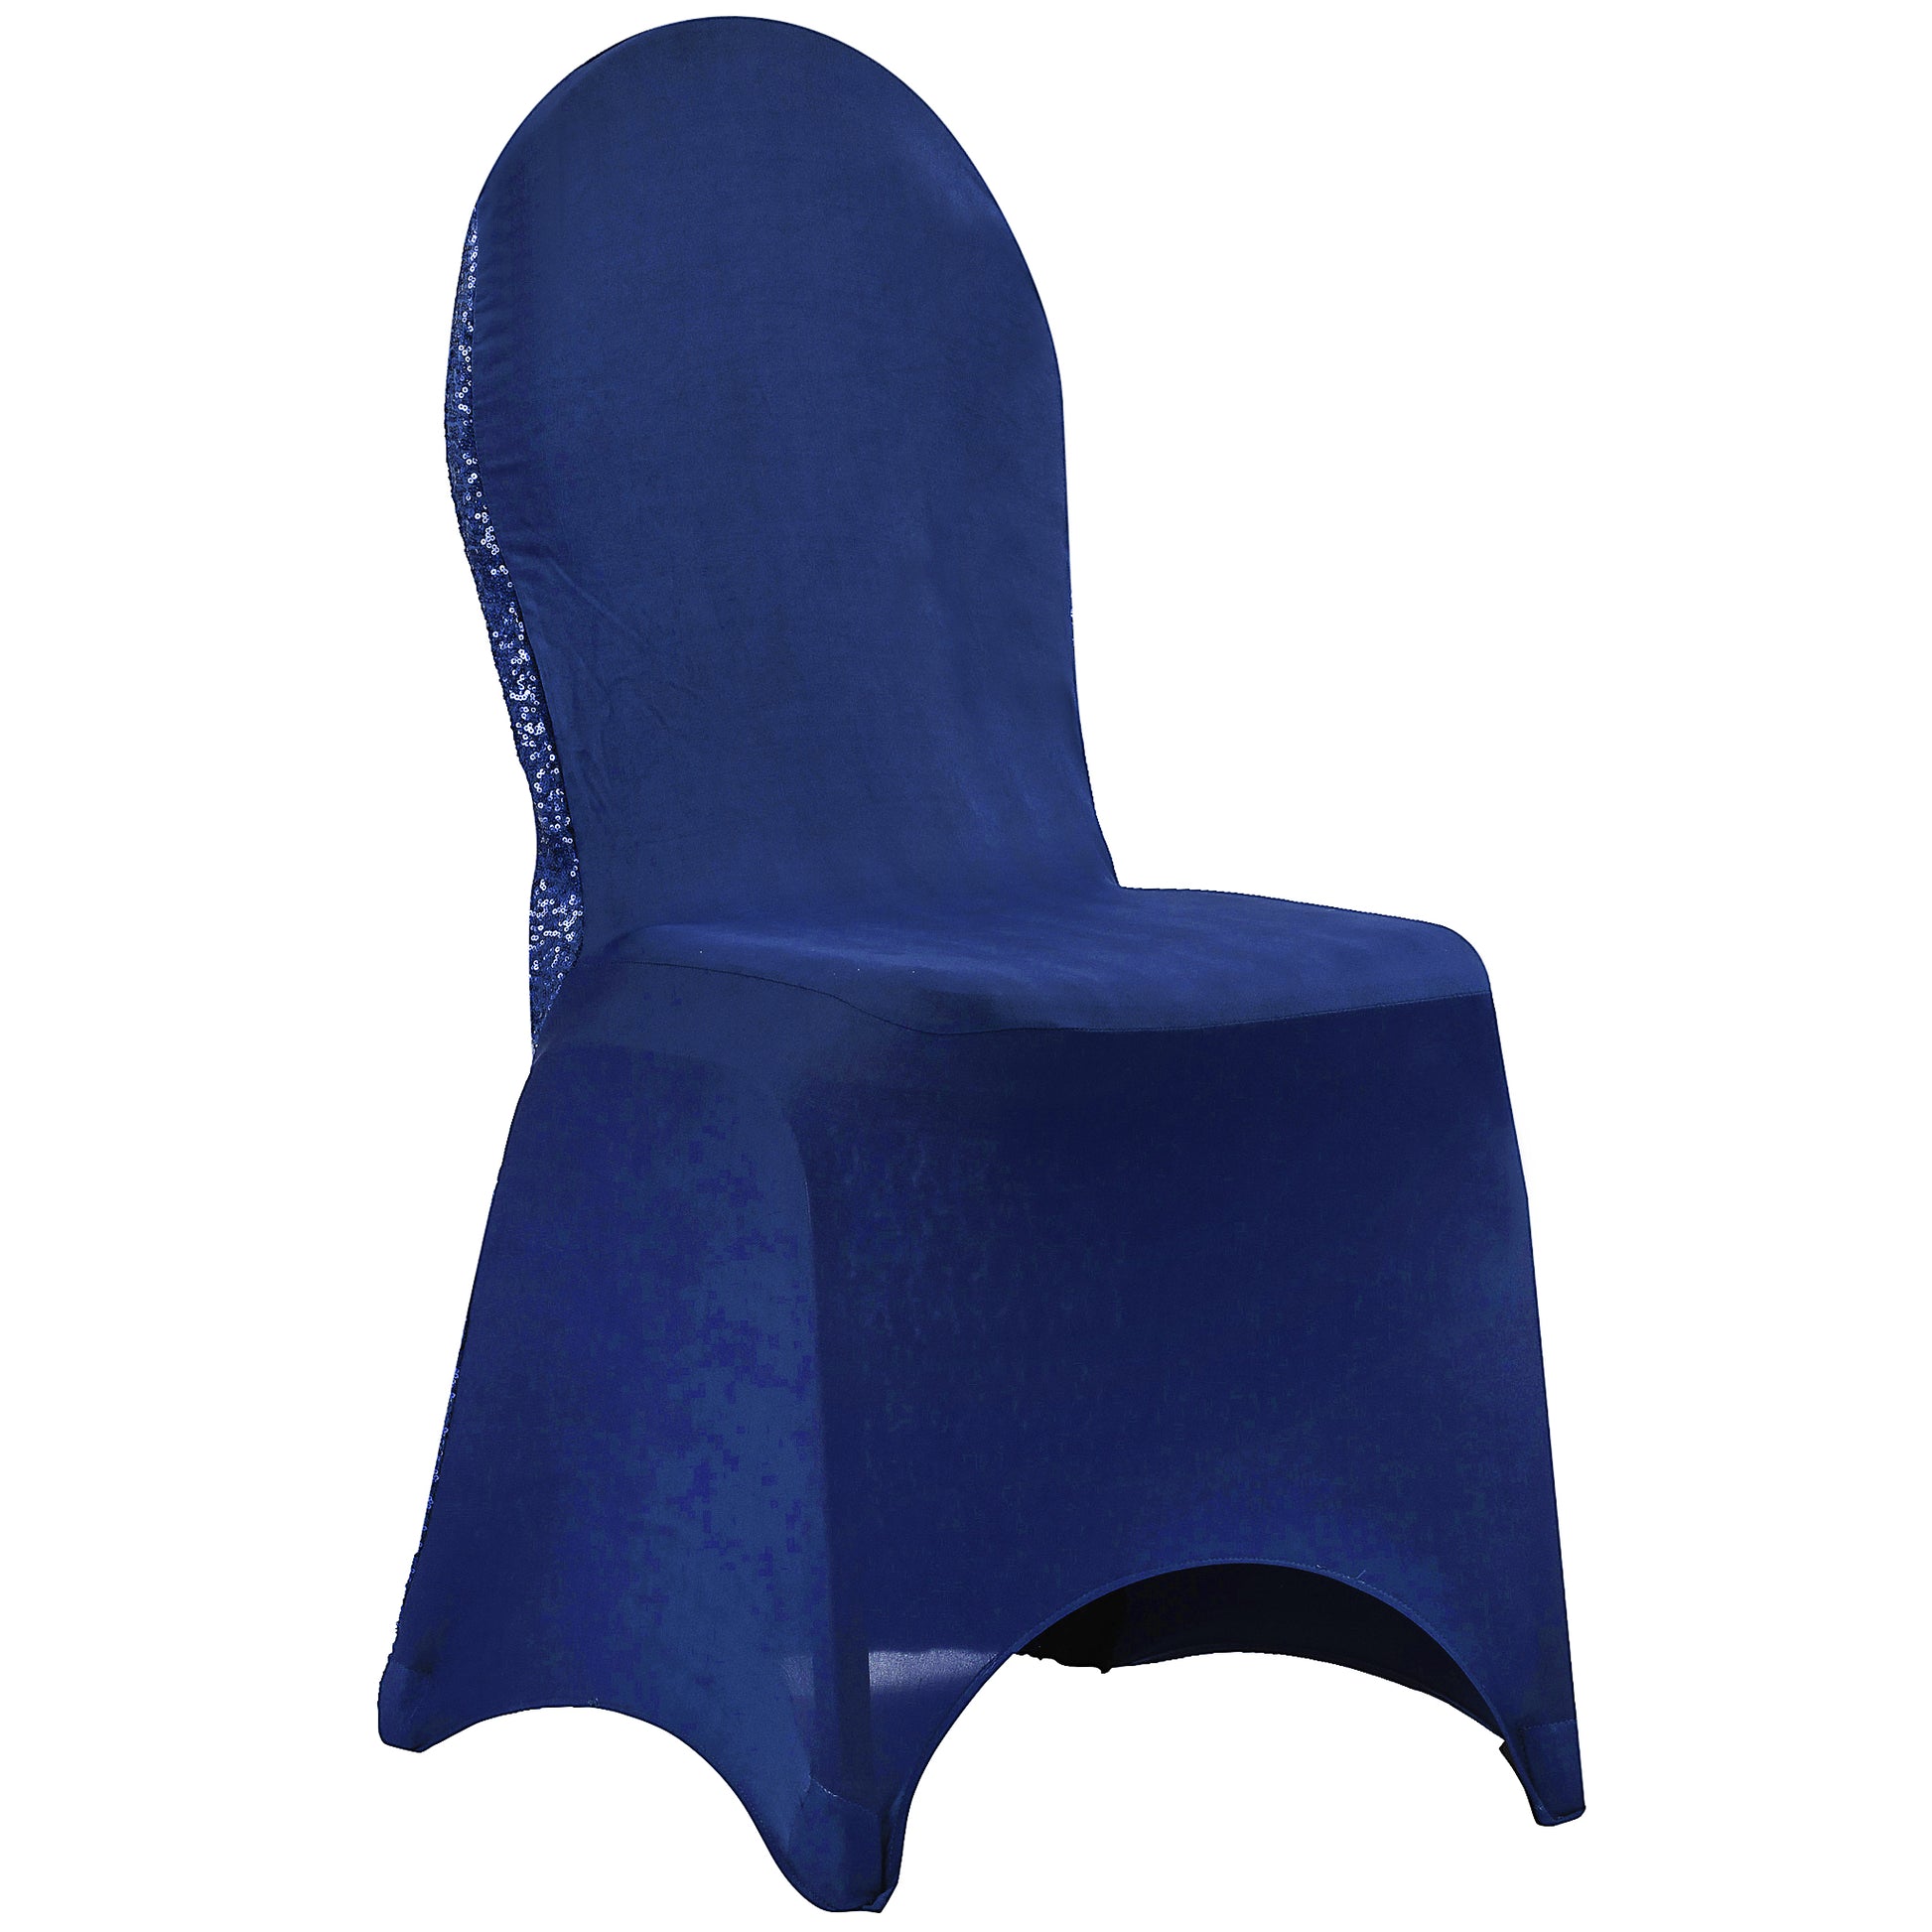 High Thick Spandex Stretch Folding Chair Cover Banquet Wedding